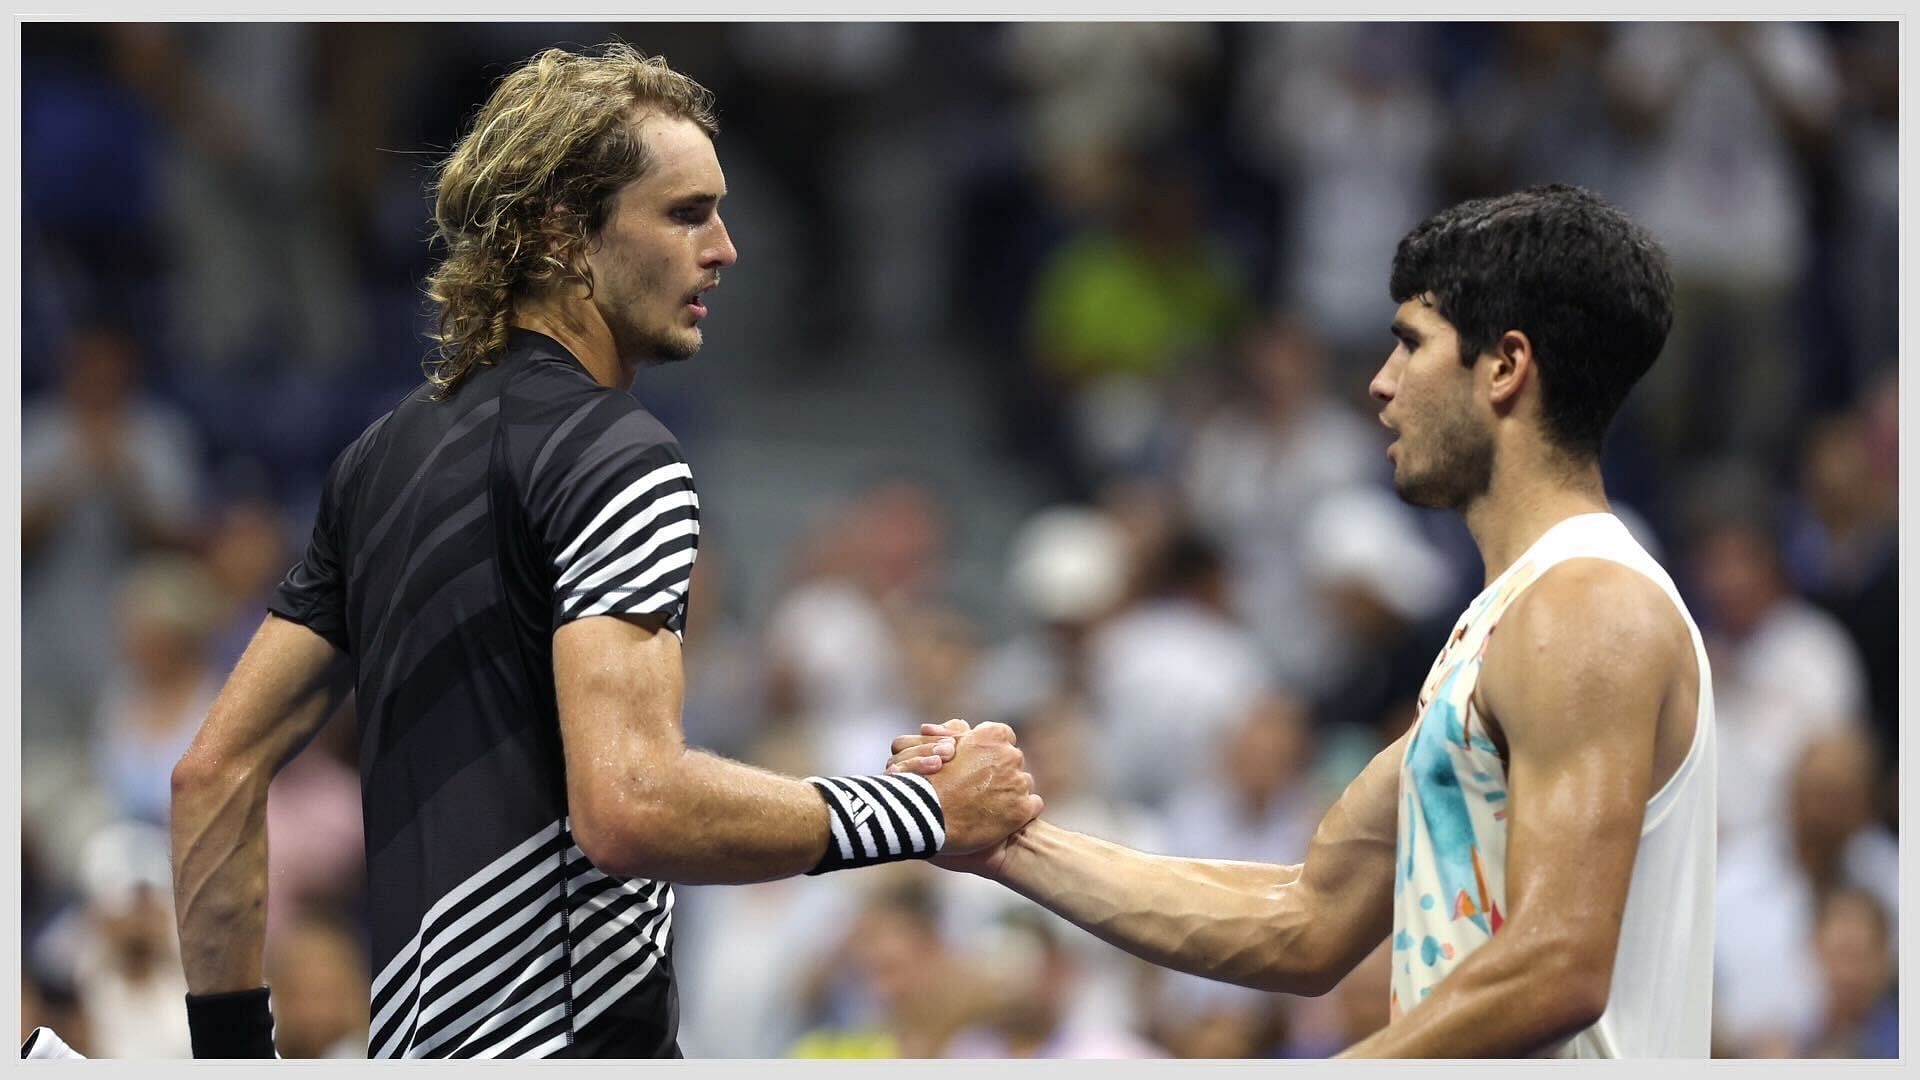 Alexander Zverev(left) shakes hands with Carlos Alcaraz(right) in the quarterfinals of the 2023 us Open